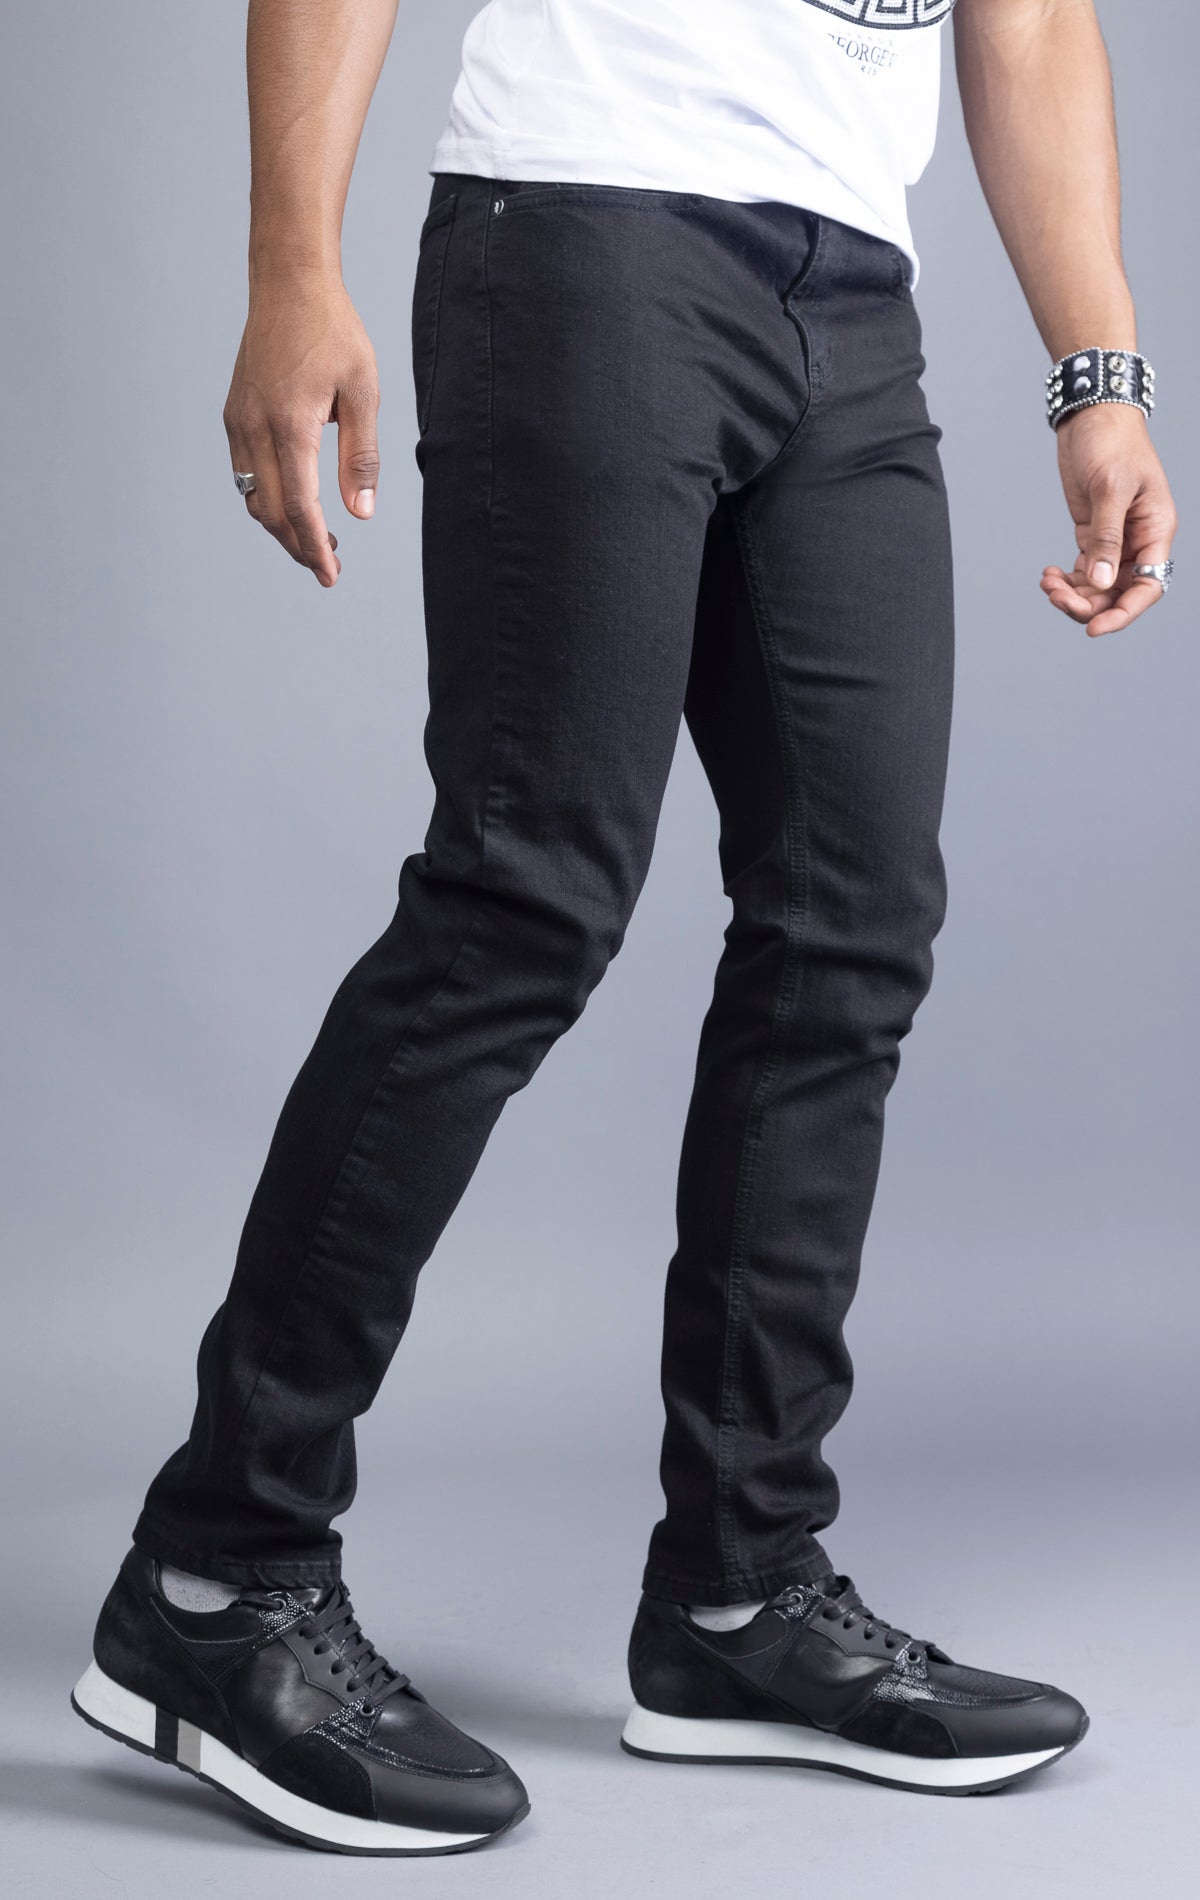 Black slim-fit jeans with a narrow leg opening and five pockets.